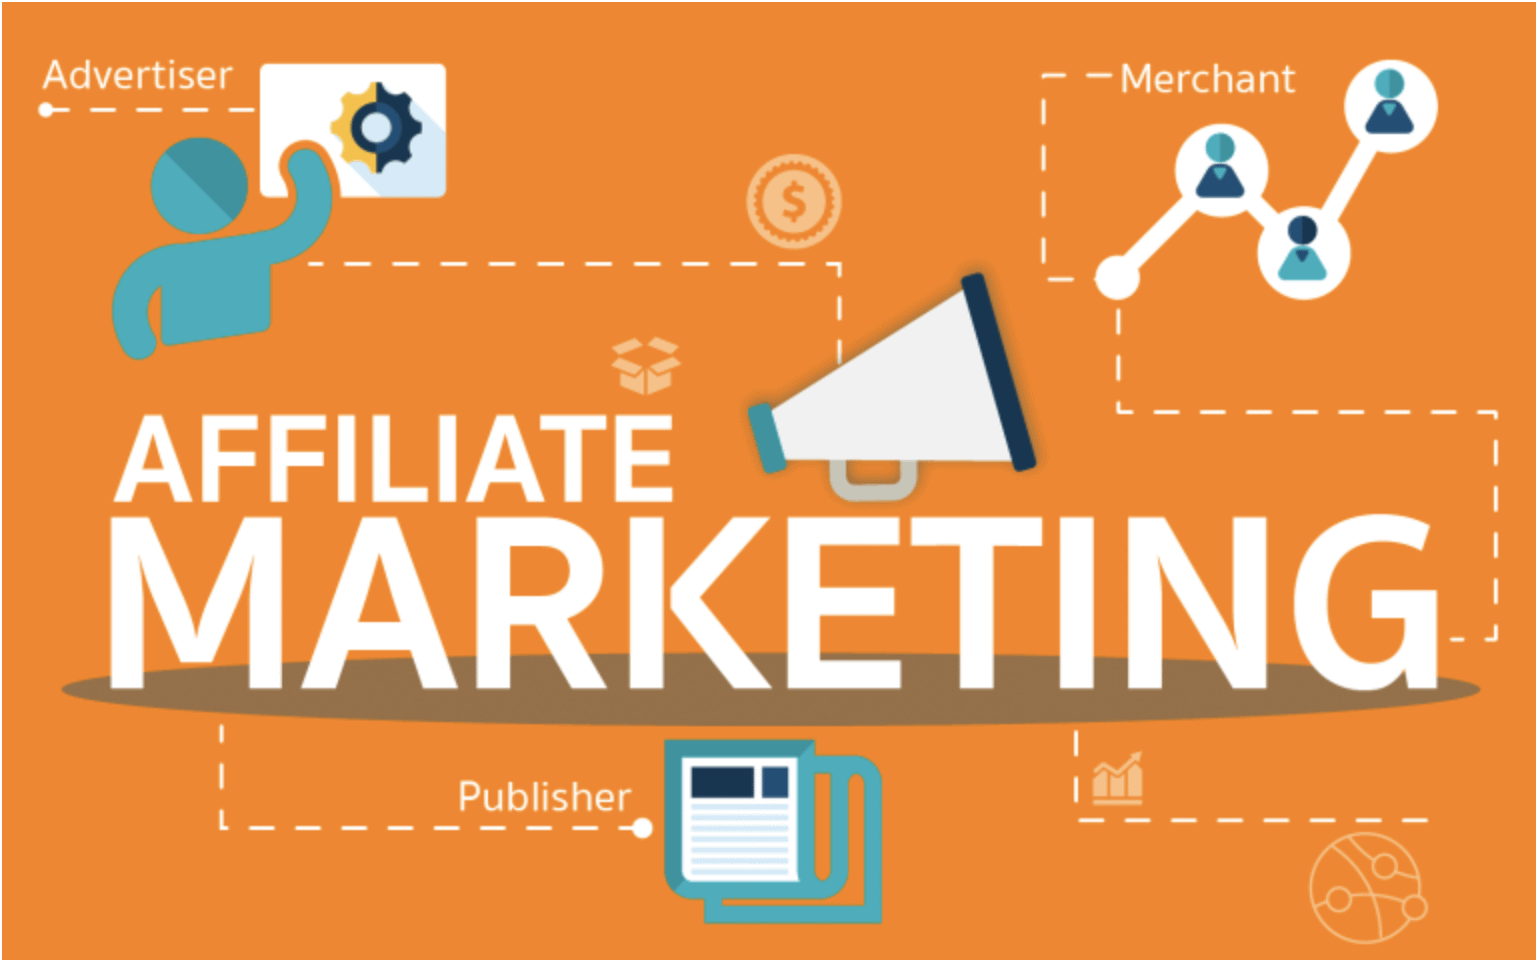 Affiliate Marketing - How To Make Money Online For Beginners